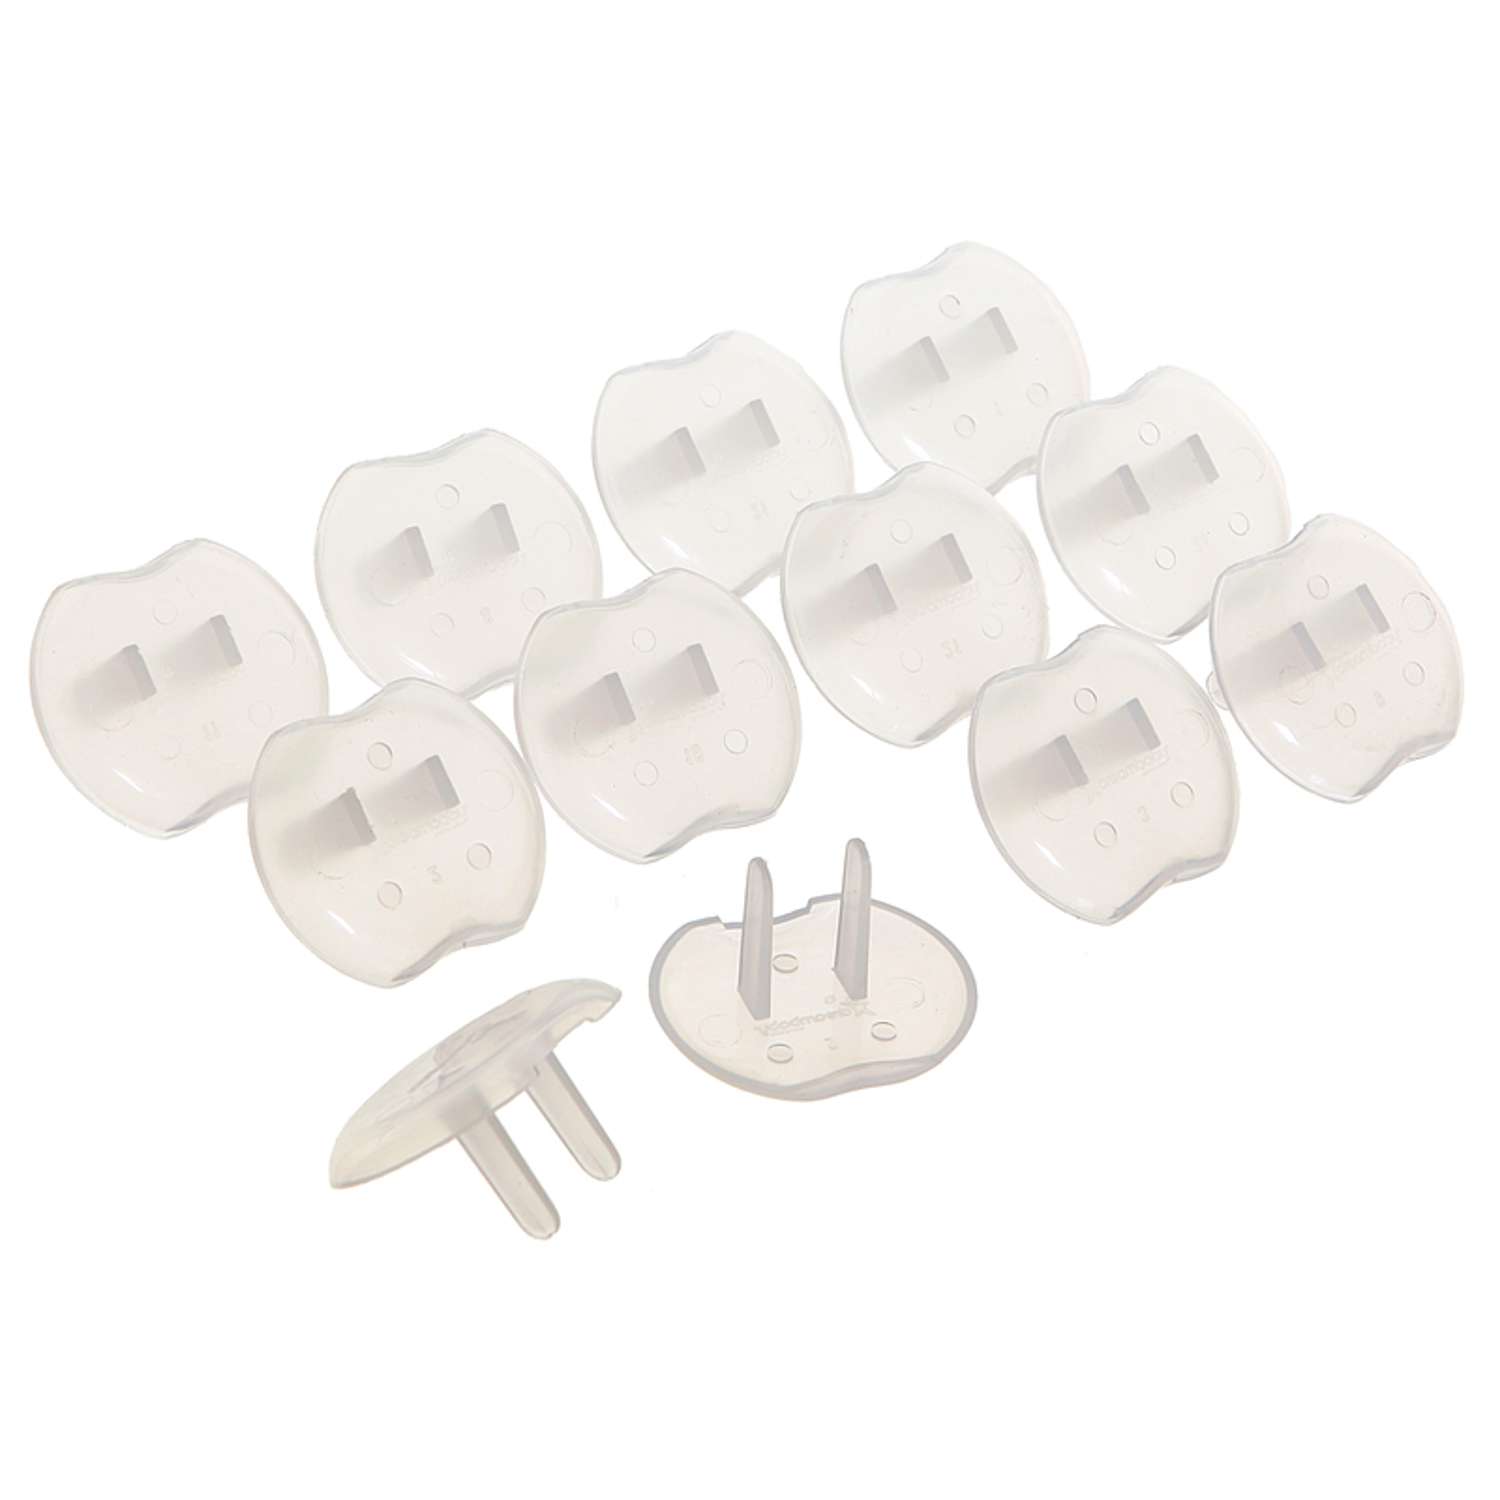 Dreambaby Clear Plastic Blind Cord Wraps 4 pk - Ace Hardware